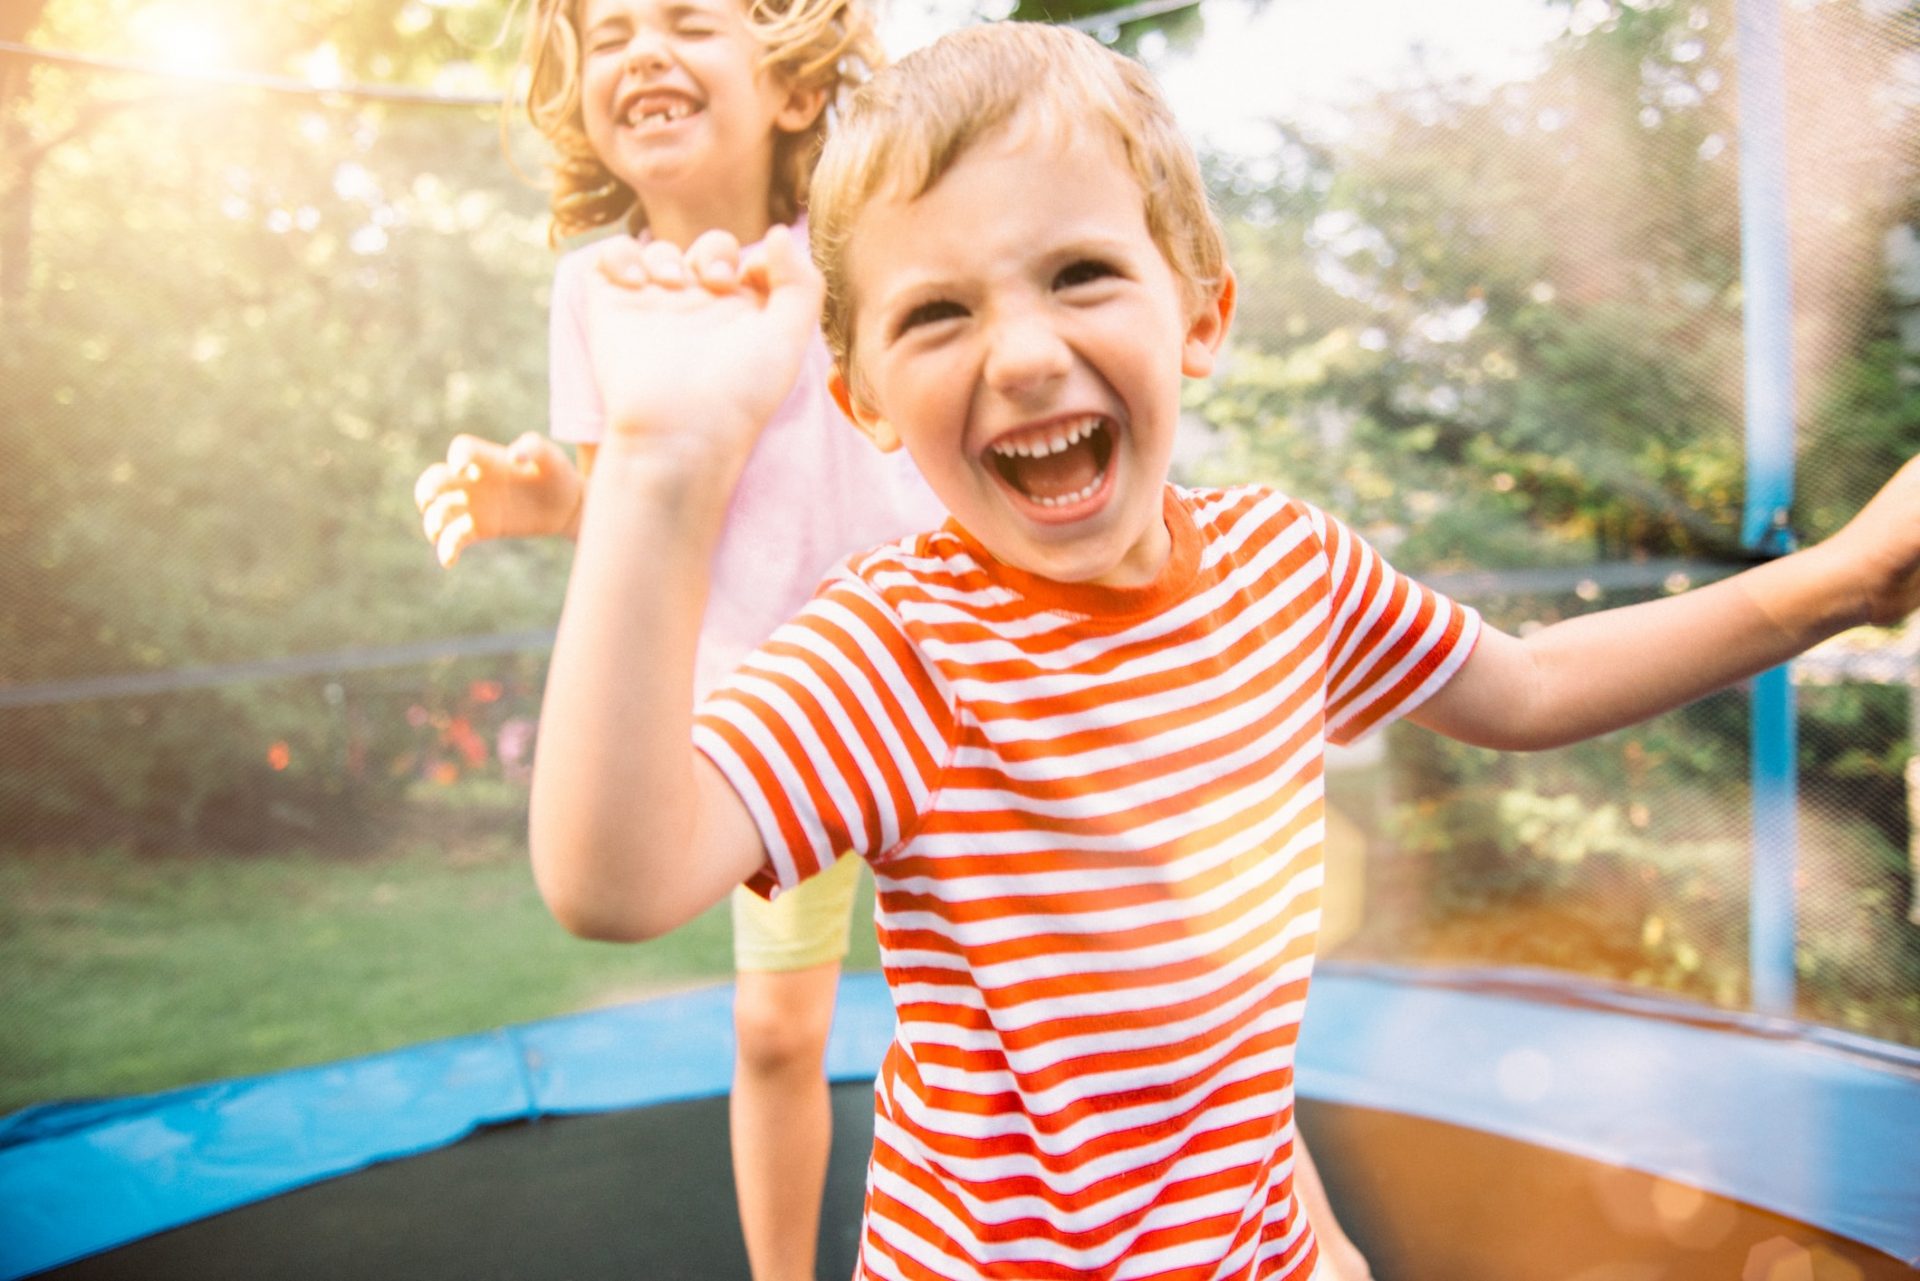 Despite guidelines recommending no more than one child on a trampoline at a time, more than 80 per cent of parents said they allow multiple kids to jump on a trampoline.